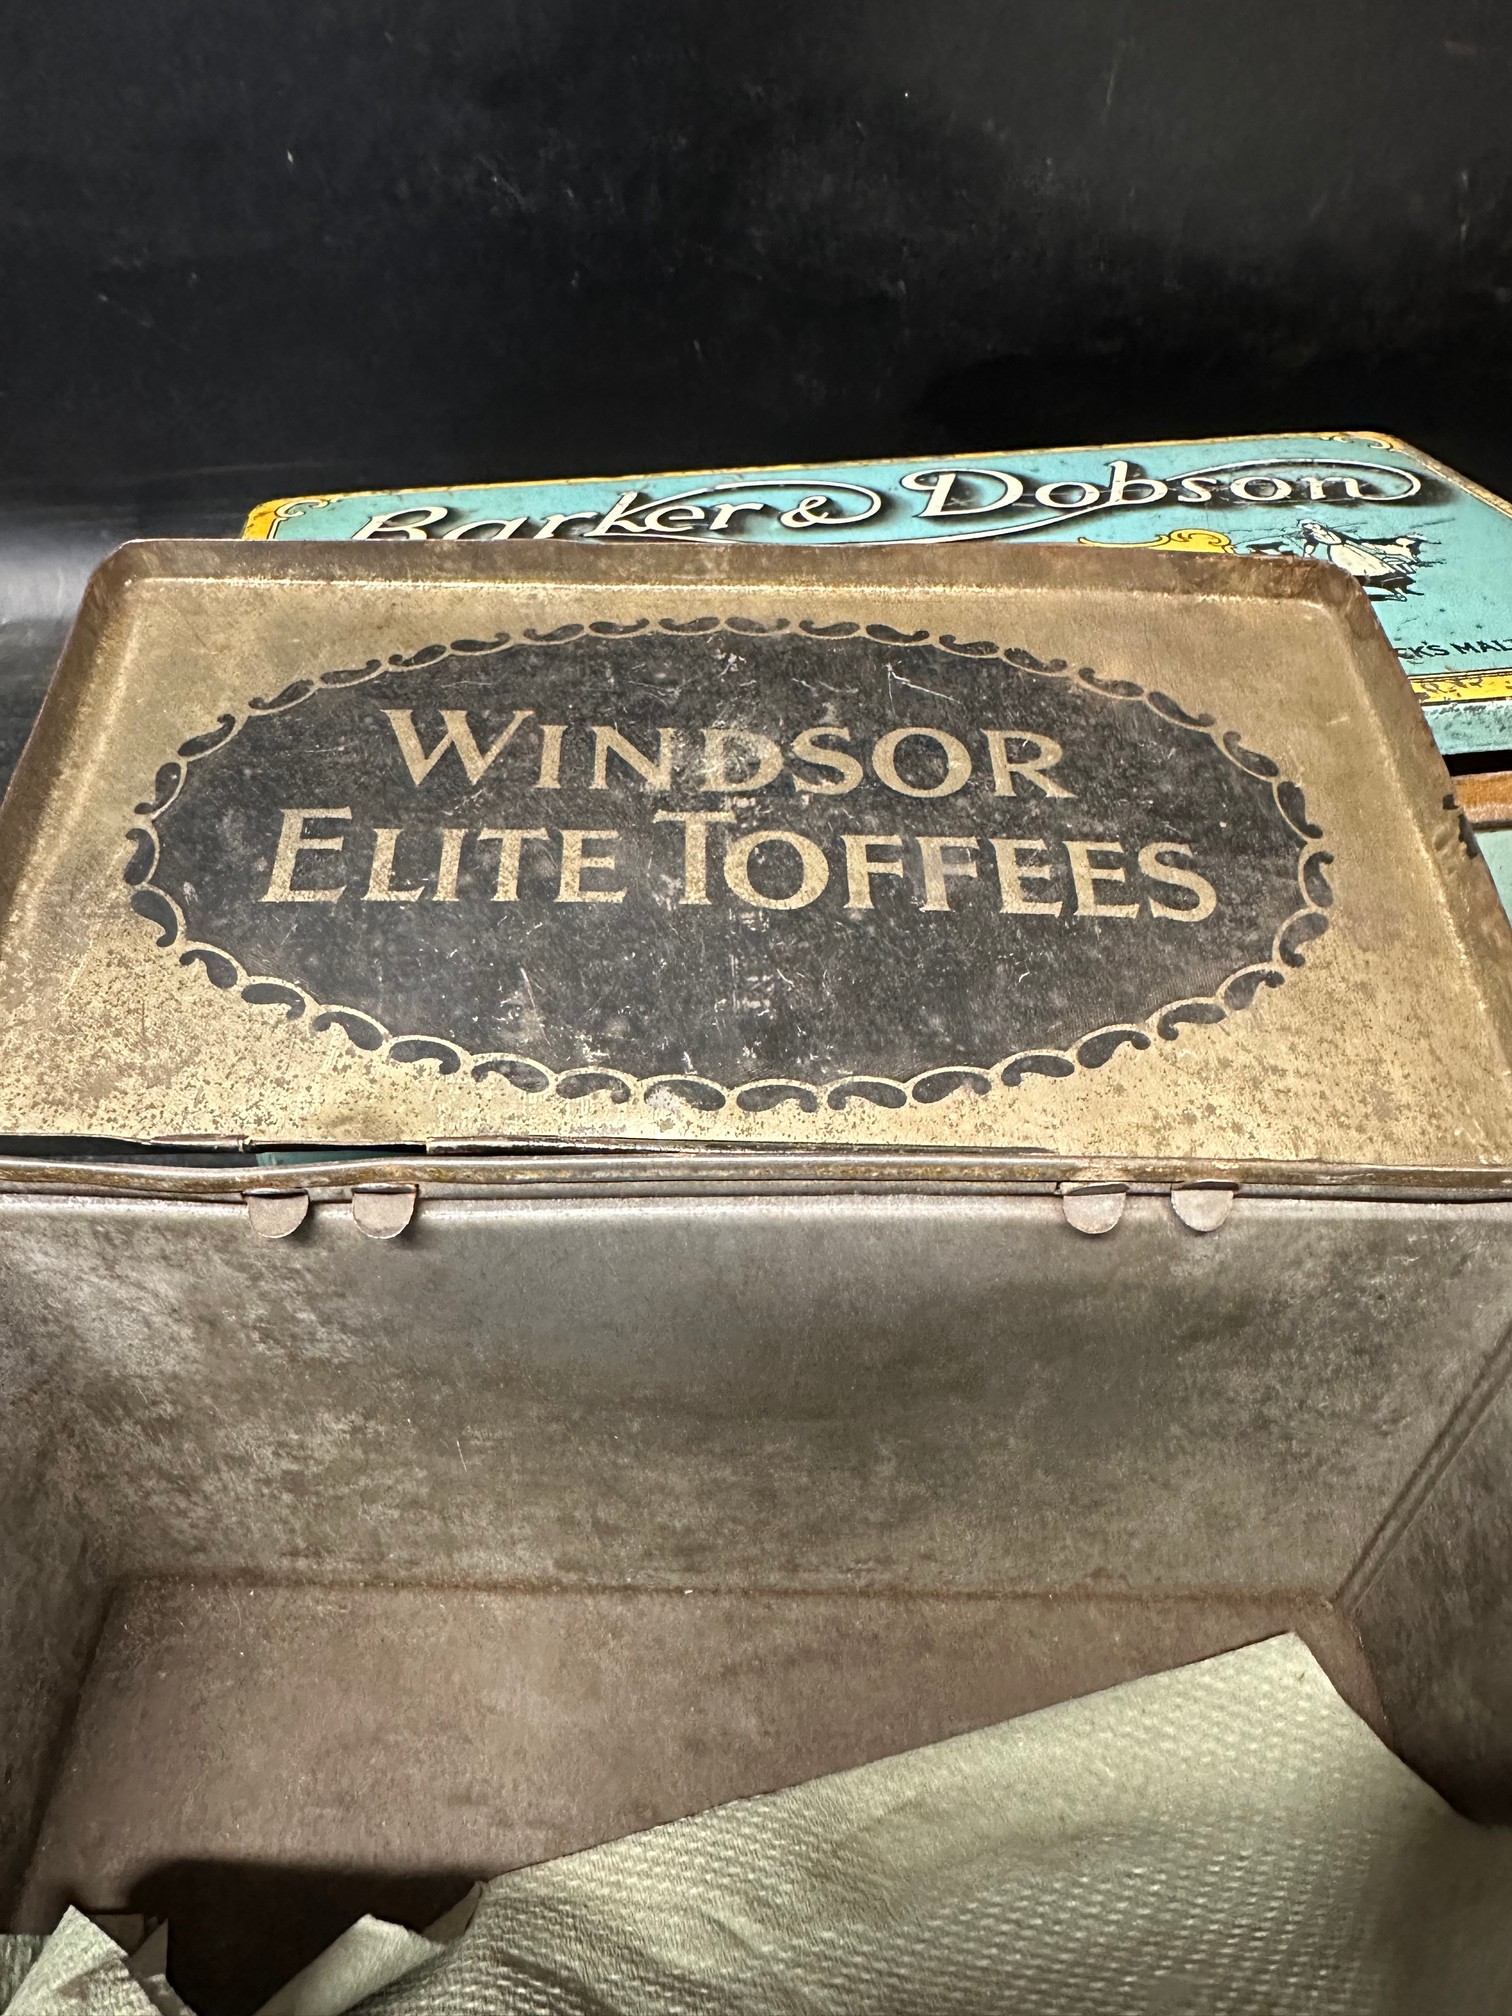 Five toffee tins: Elite Toffees by Windsor Confectionery Co. Ltd. Liverpool, Thorne's by Henry - Image 8 of 8